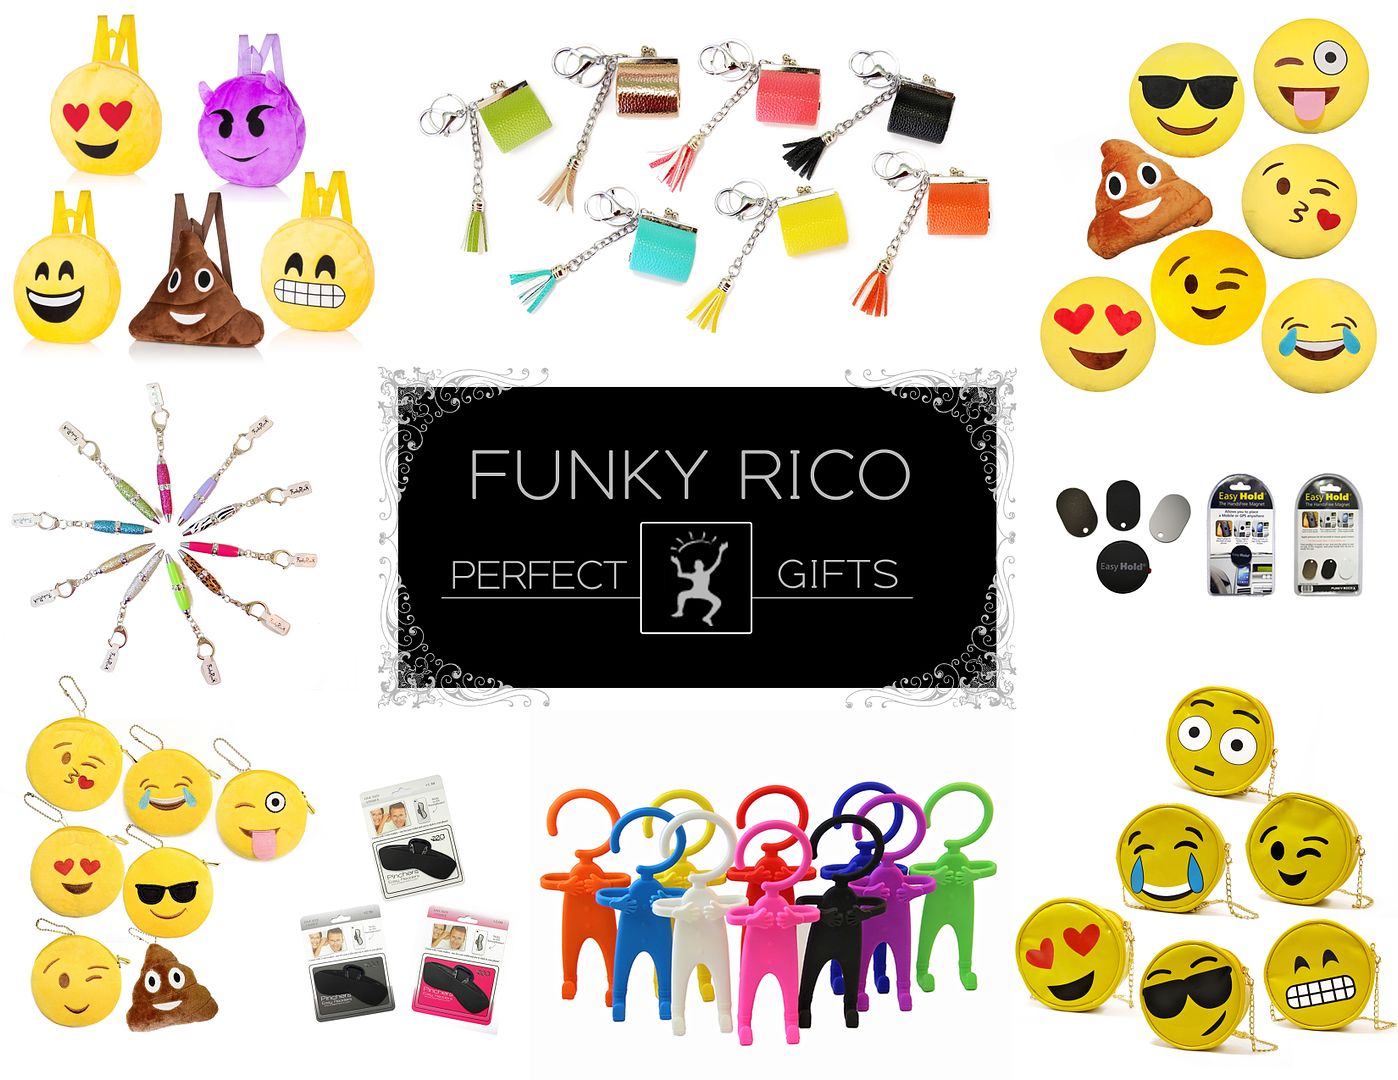  photo Funky Rico All Products_zps2gordsoq.jpg